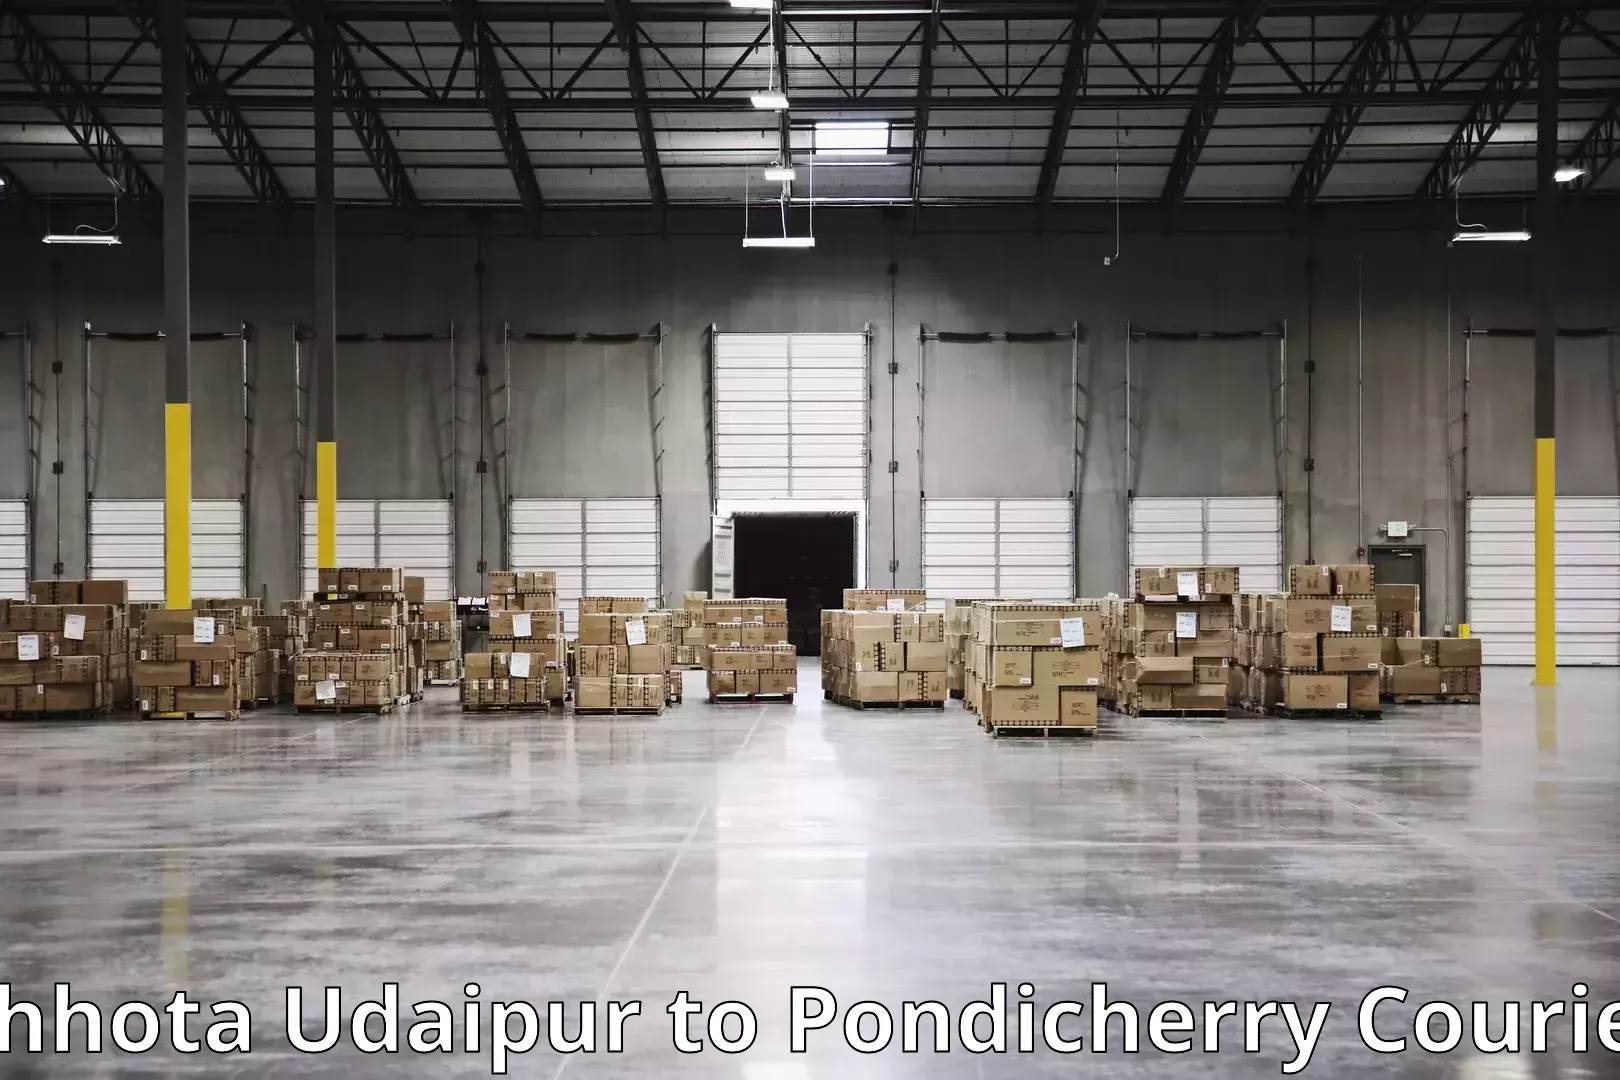 Trusted relocation experts Chhota Udaipur to Pondicherry University